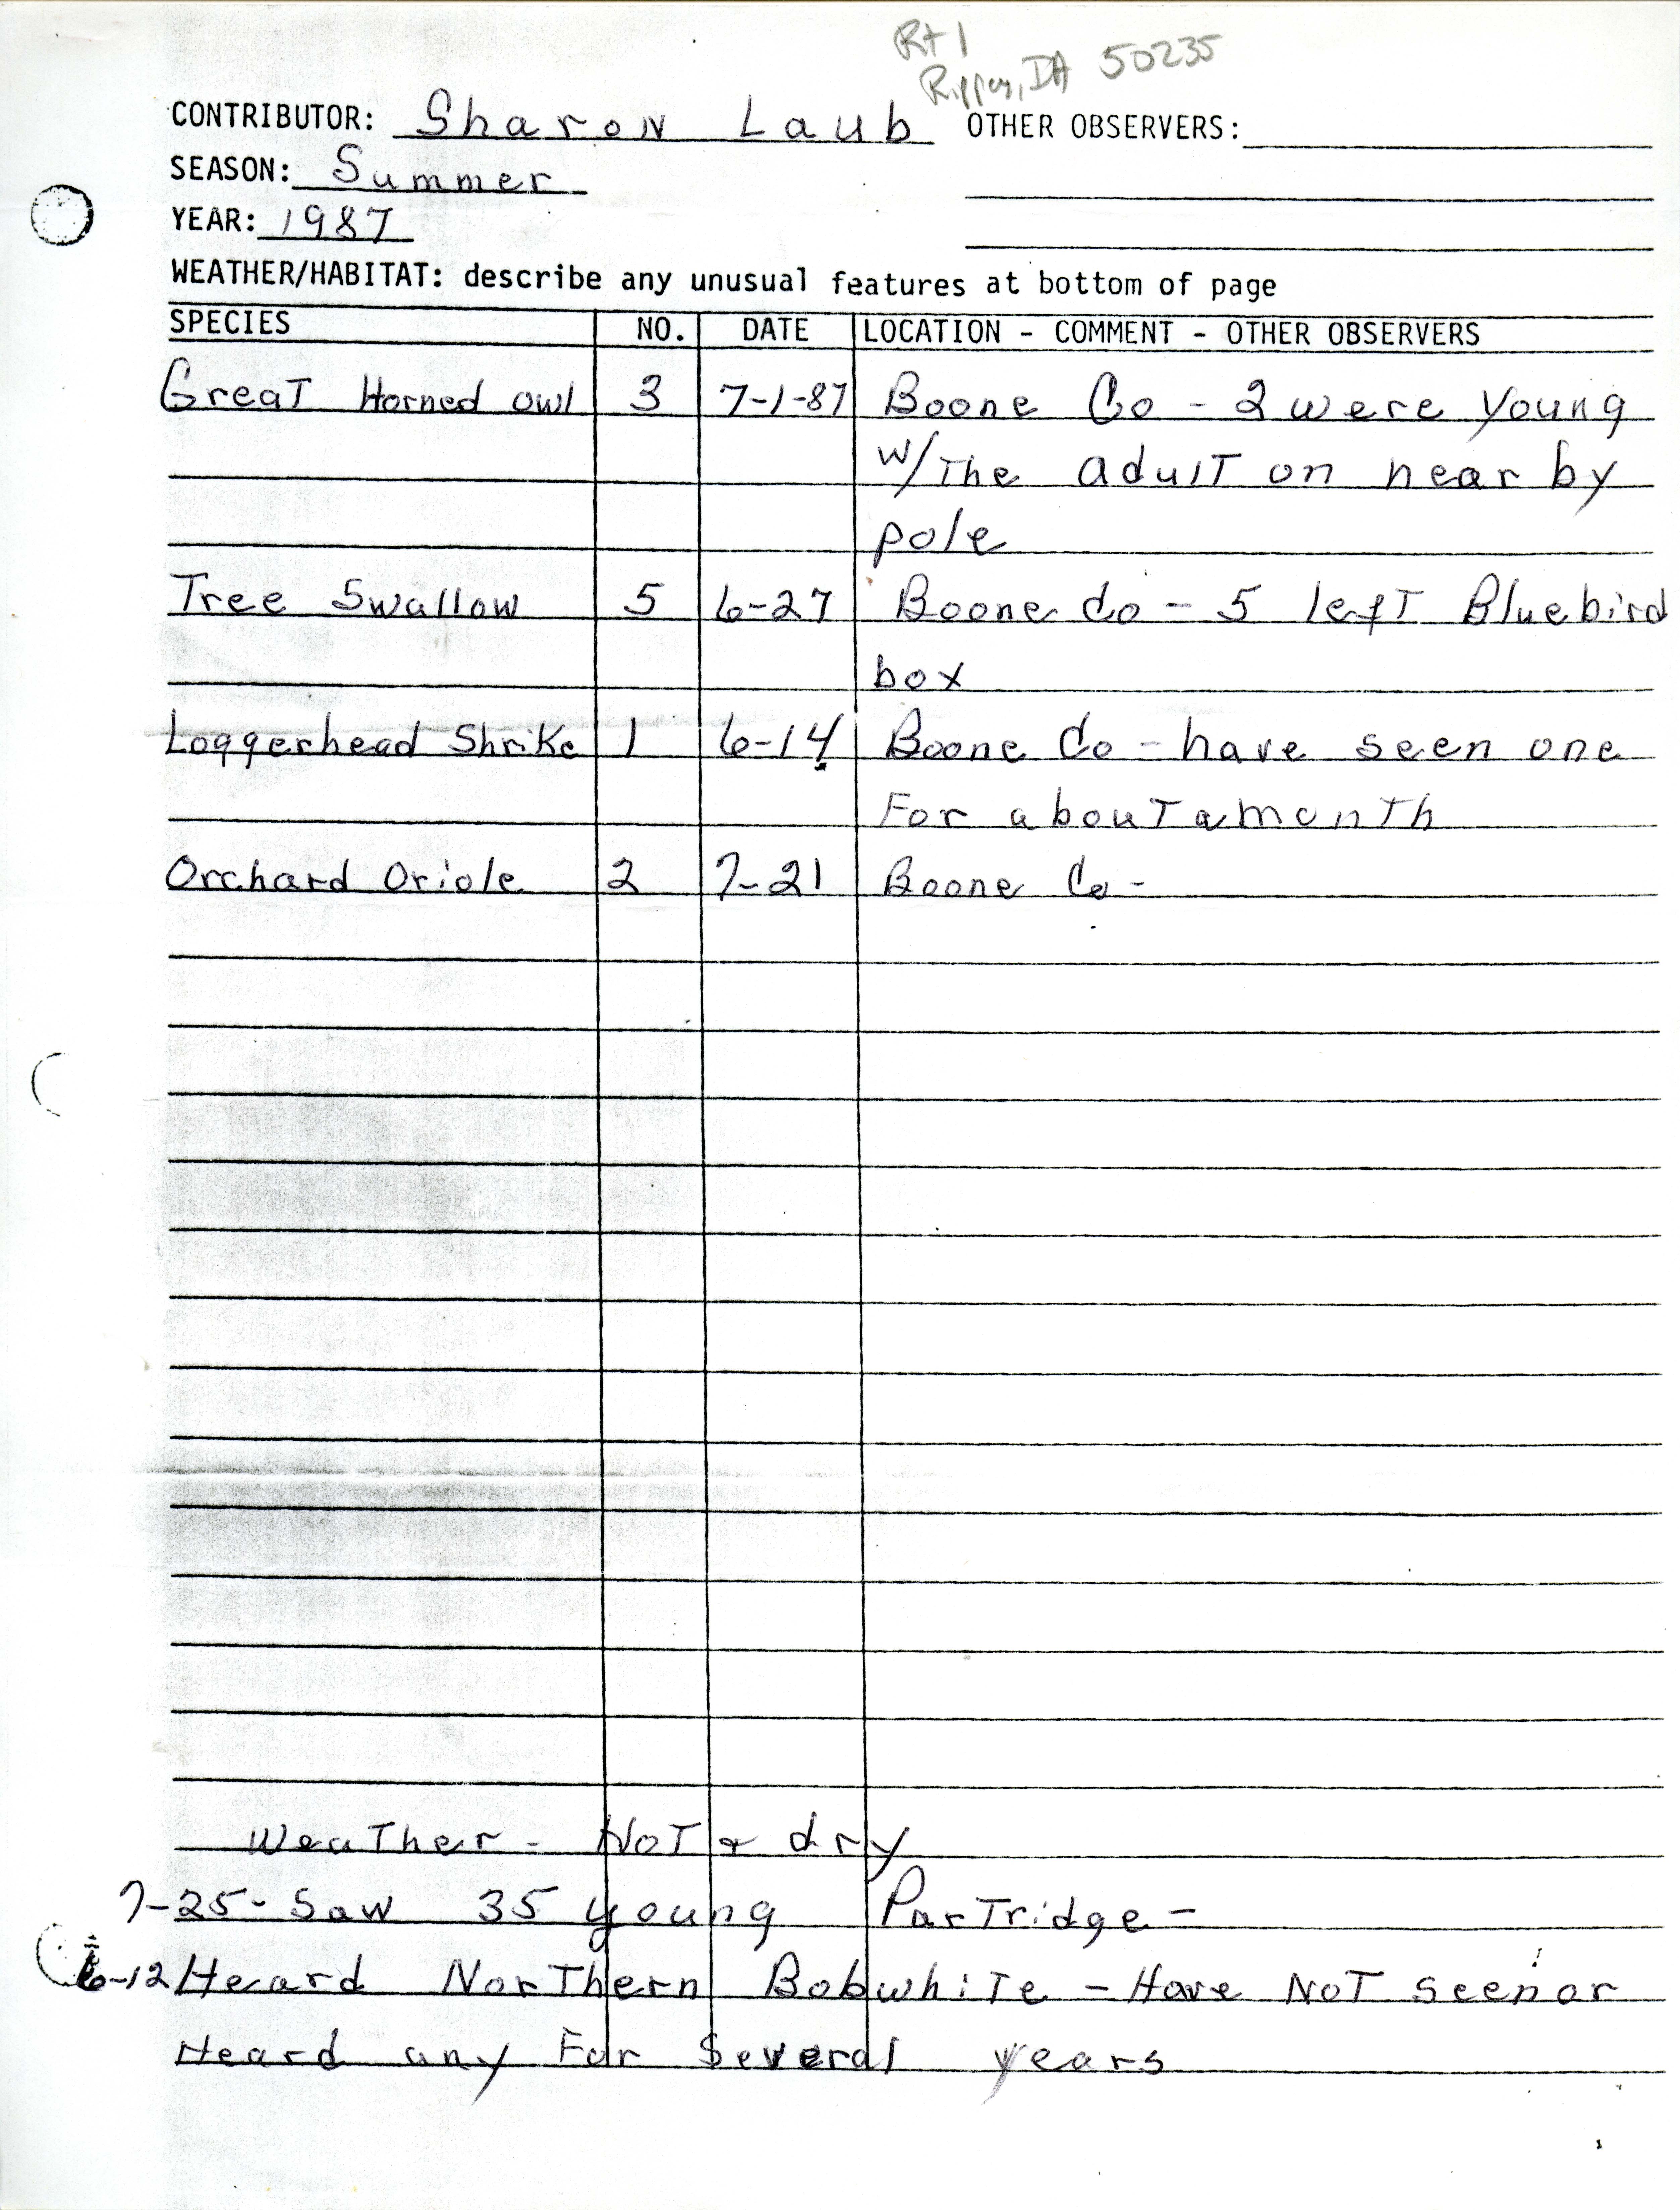 Field notes contributed by Sharon Laub, summer 1987